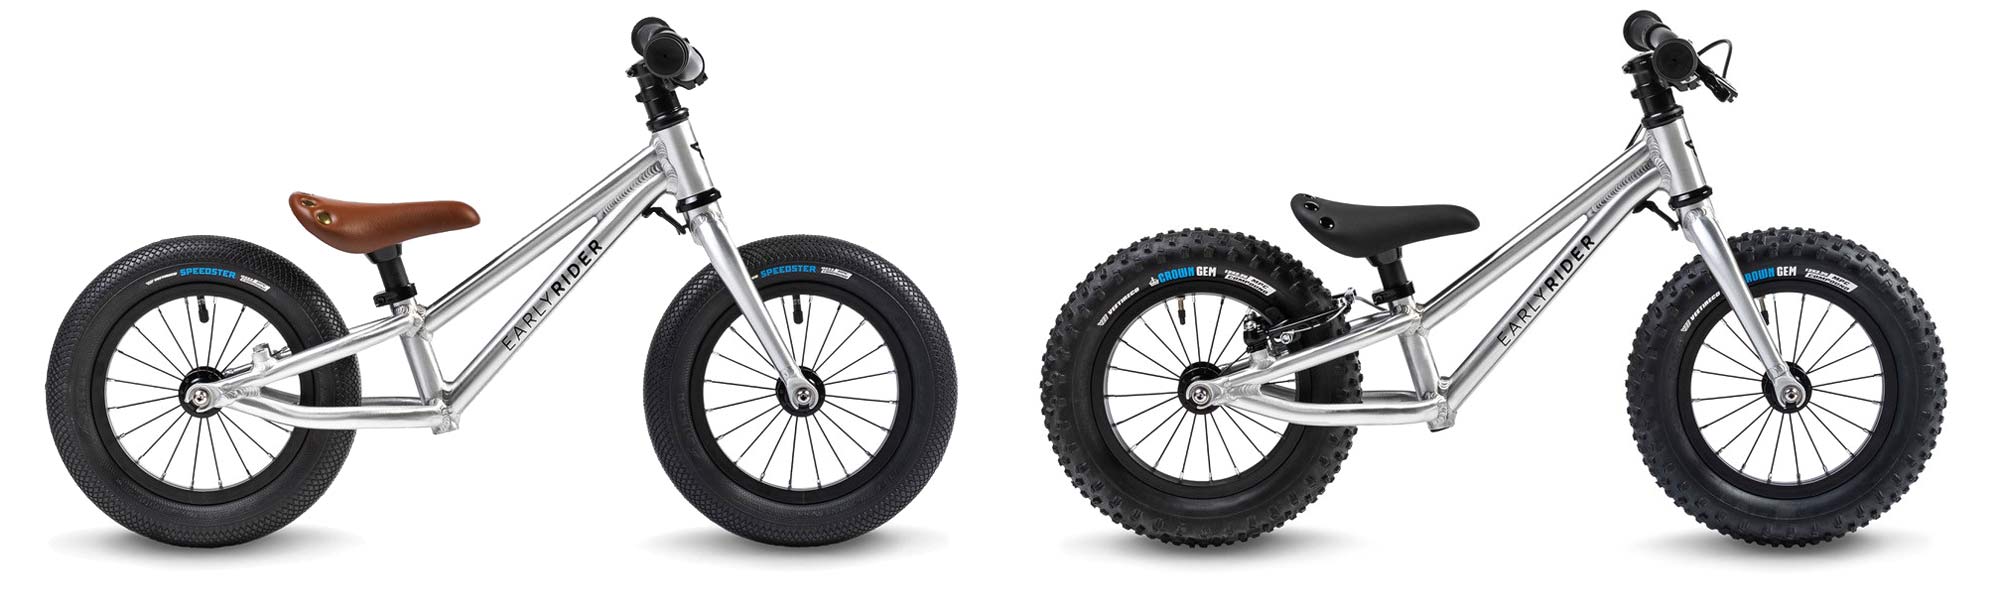 Early Rider + Lil Shredder affordable, lightweight aluminum alloy performance kids mountain bikes